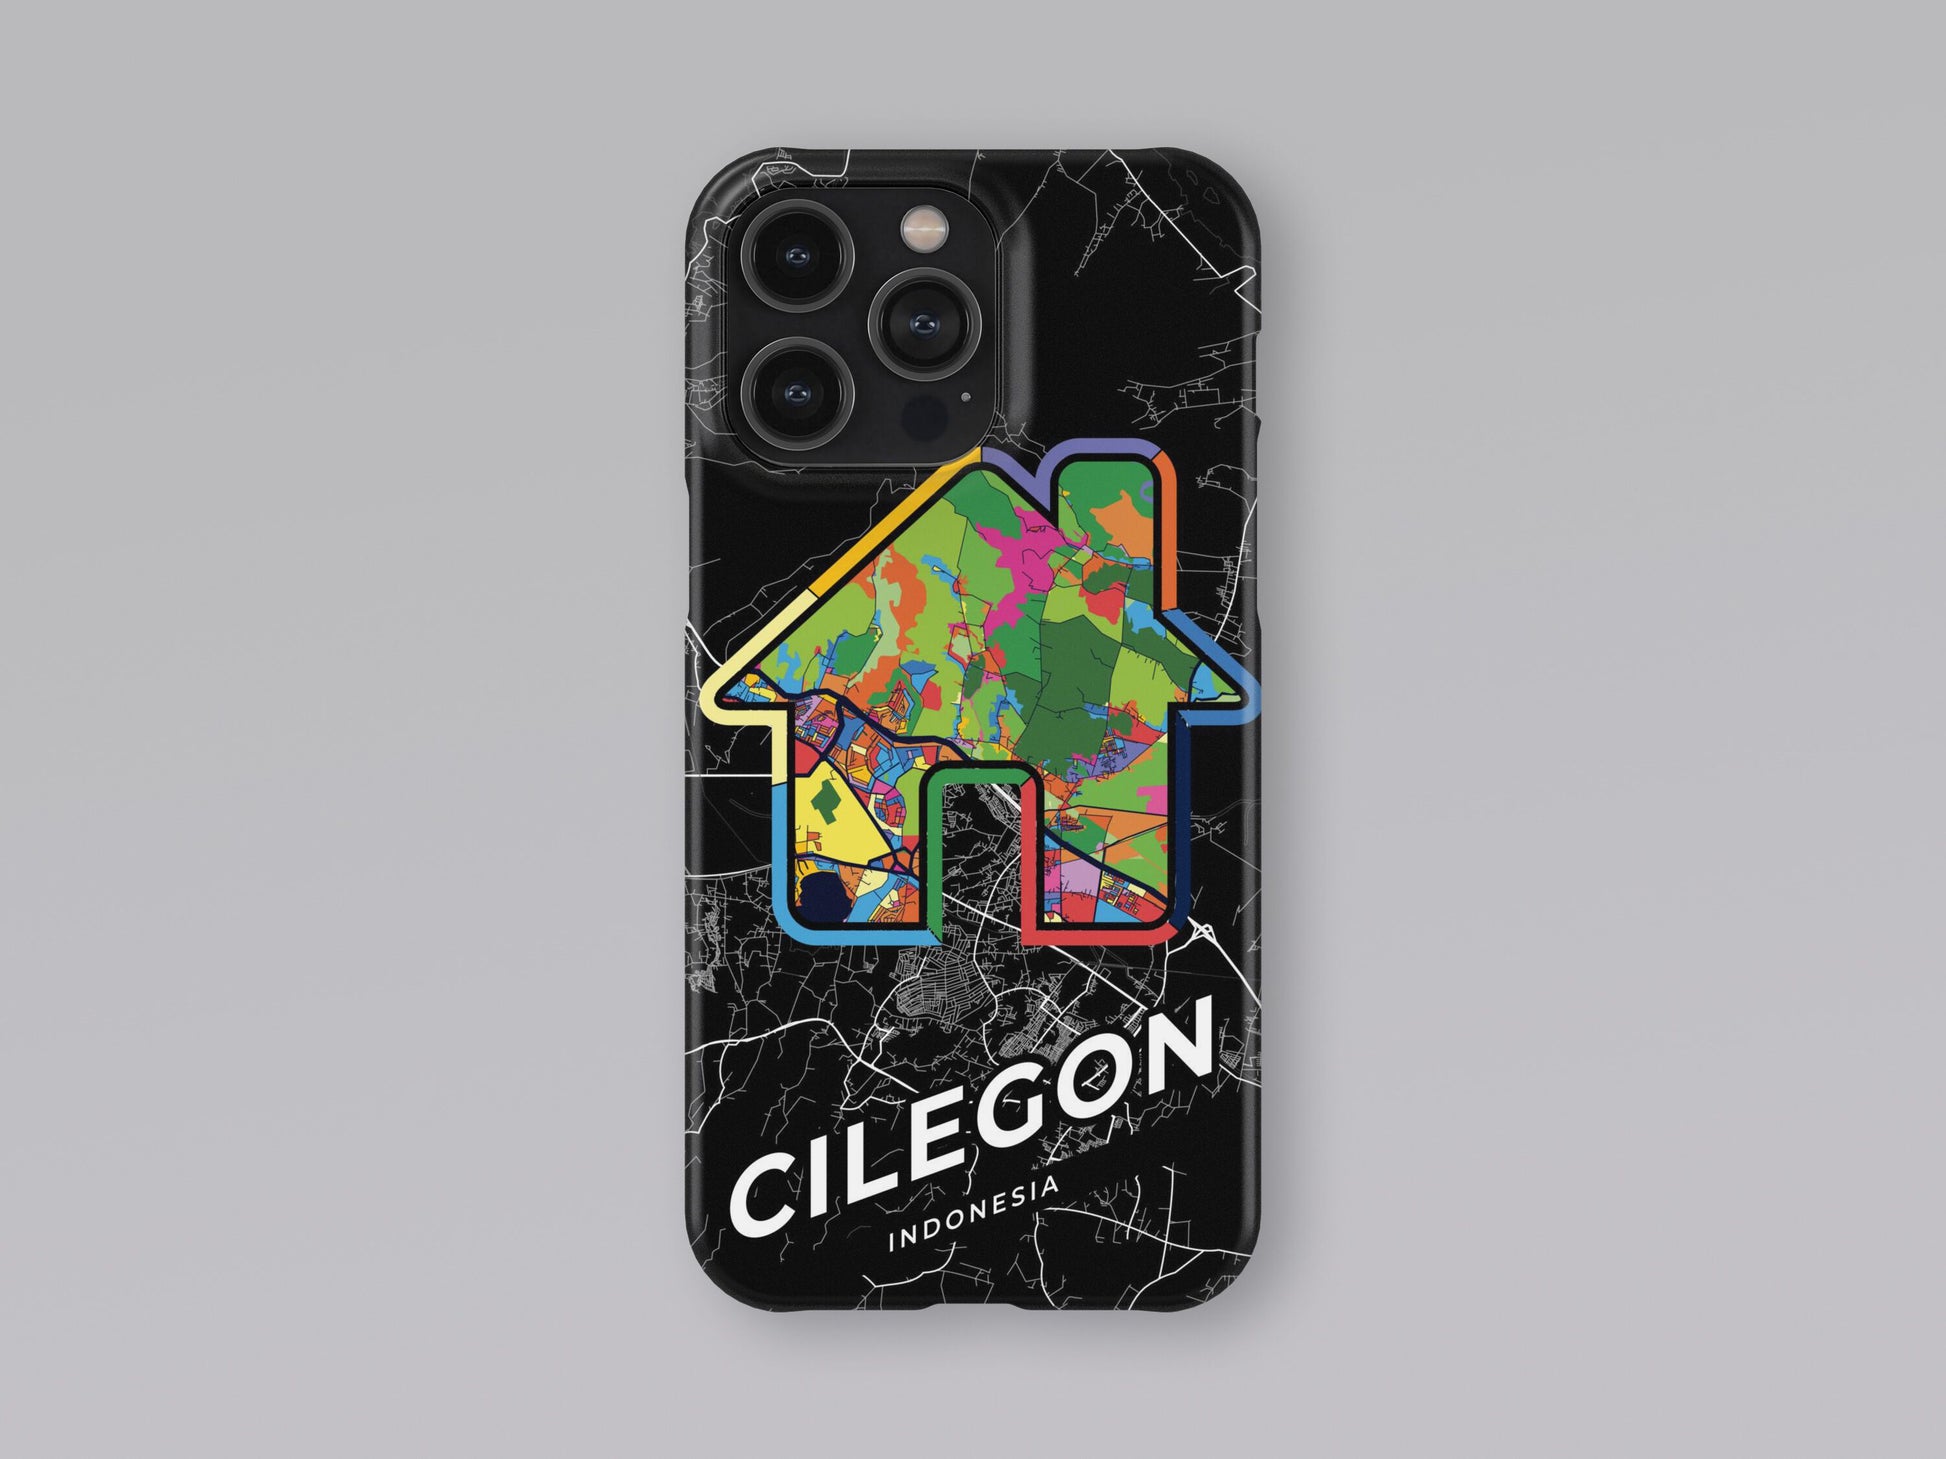 Cilegon Indonesia slim phone case with colorful icon. Birthday, wedding or housewarming gift. Couple match cases. 3